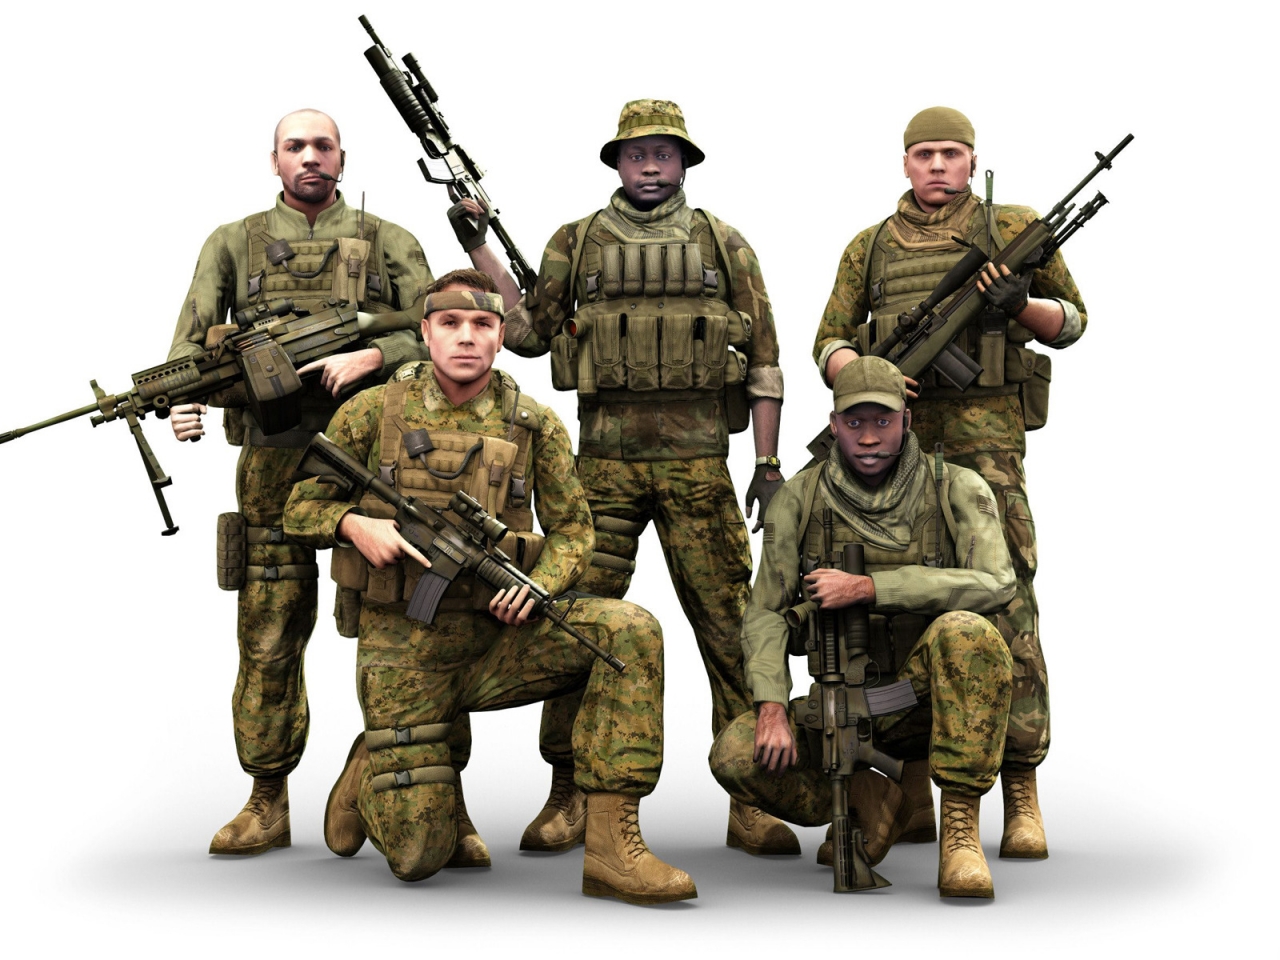 ArmA 2 Characters for 1280 x 960 resolution